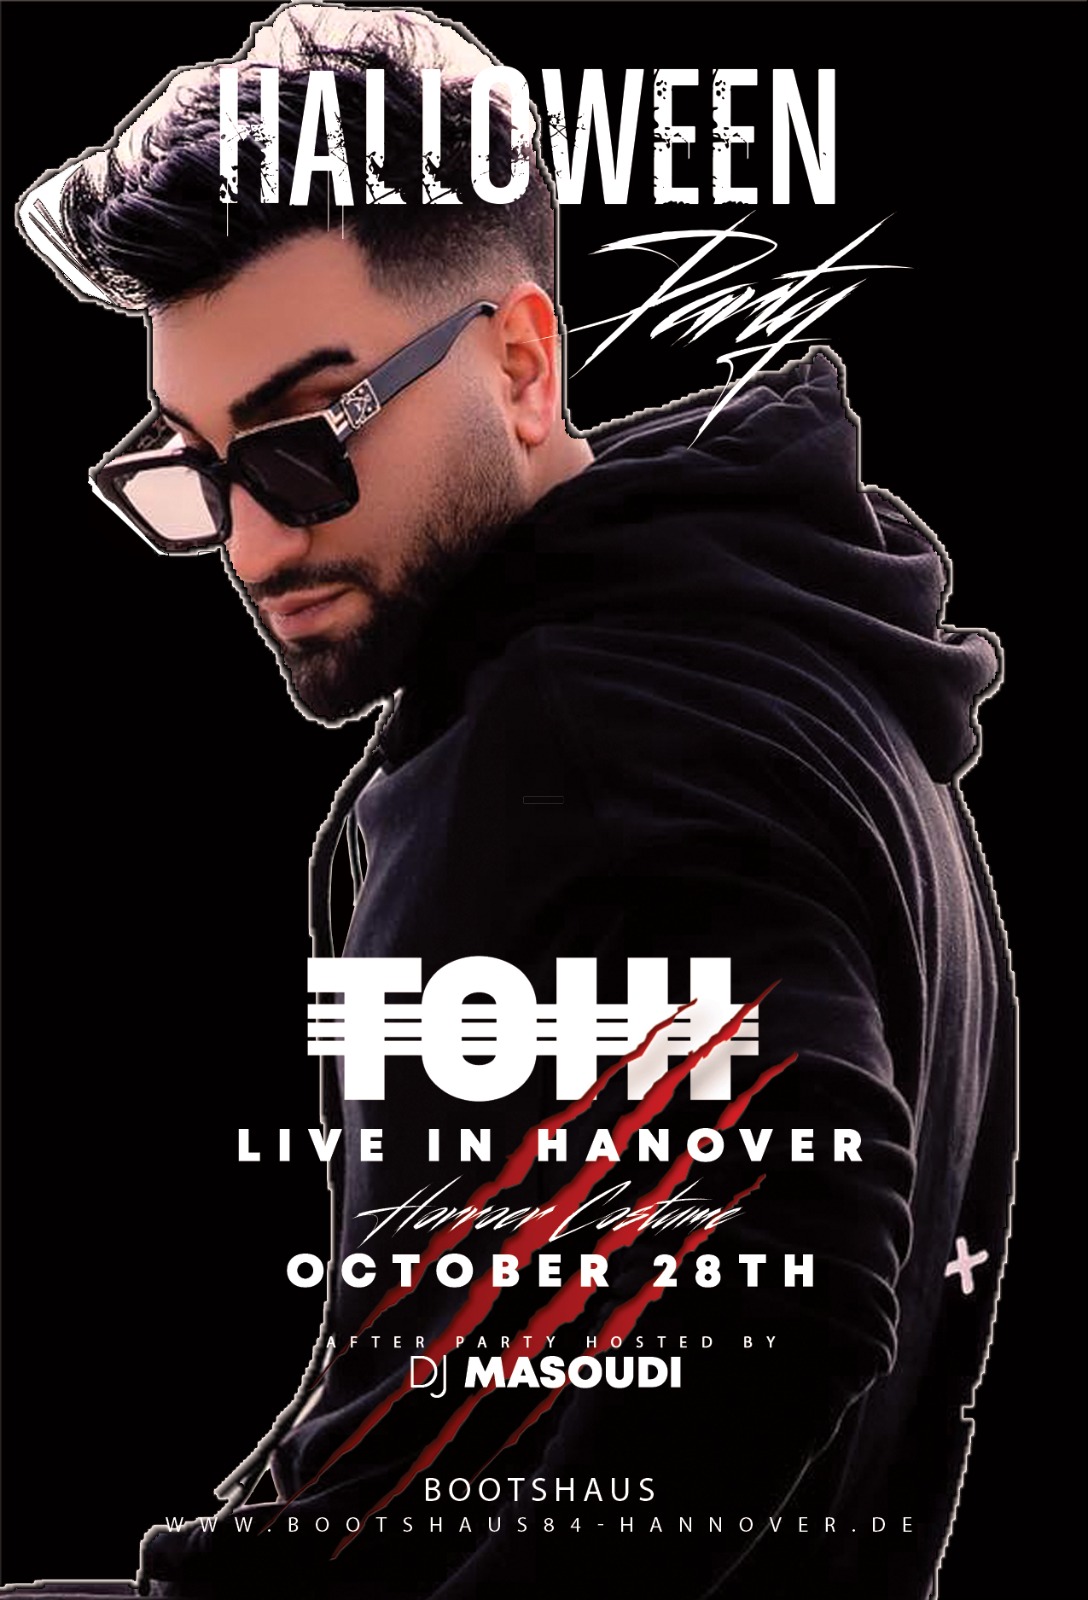 Tohi live and the big Halloween-Party in Germany